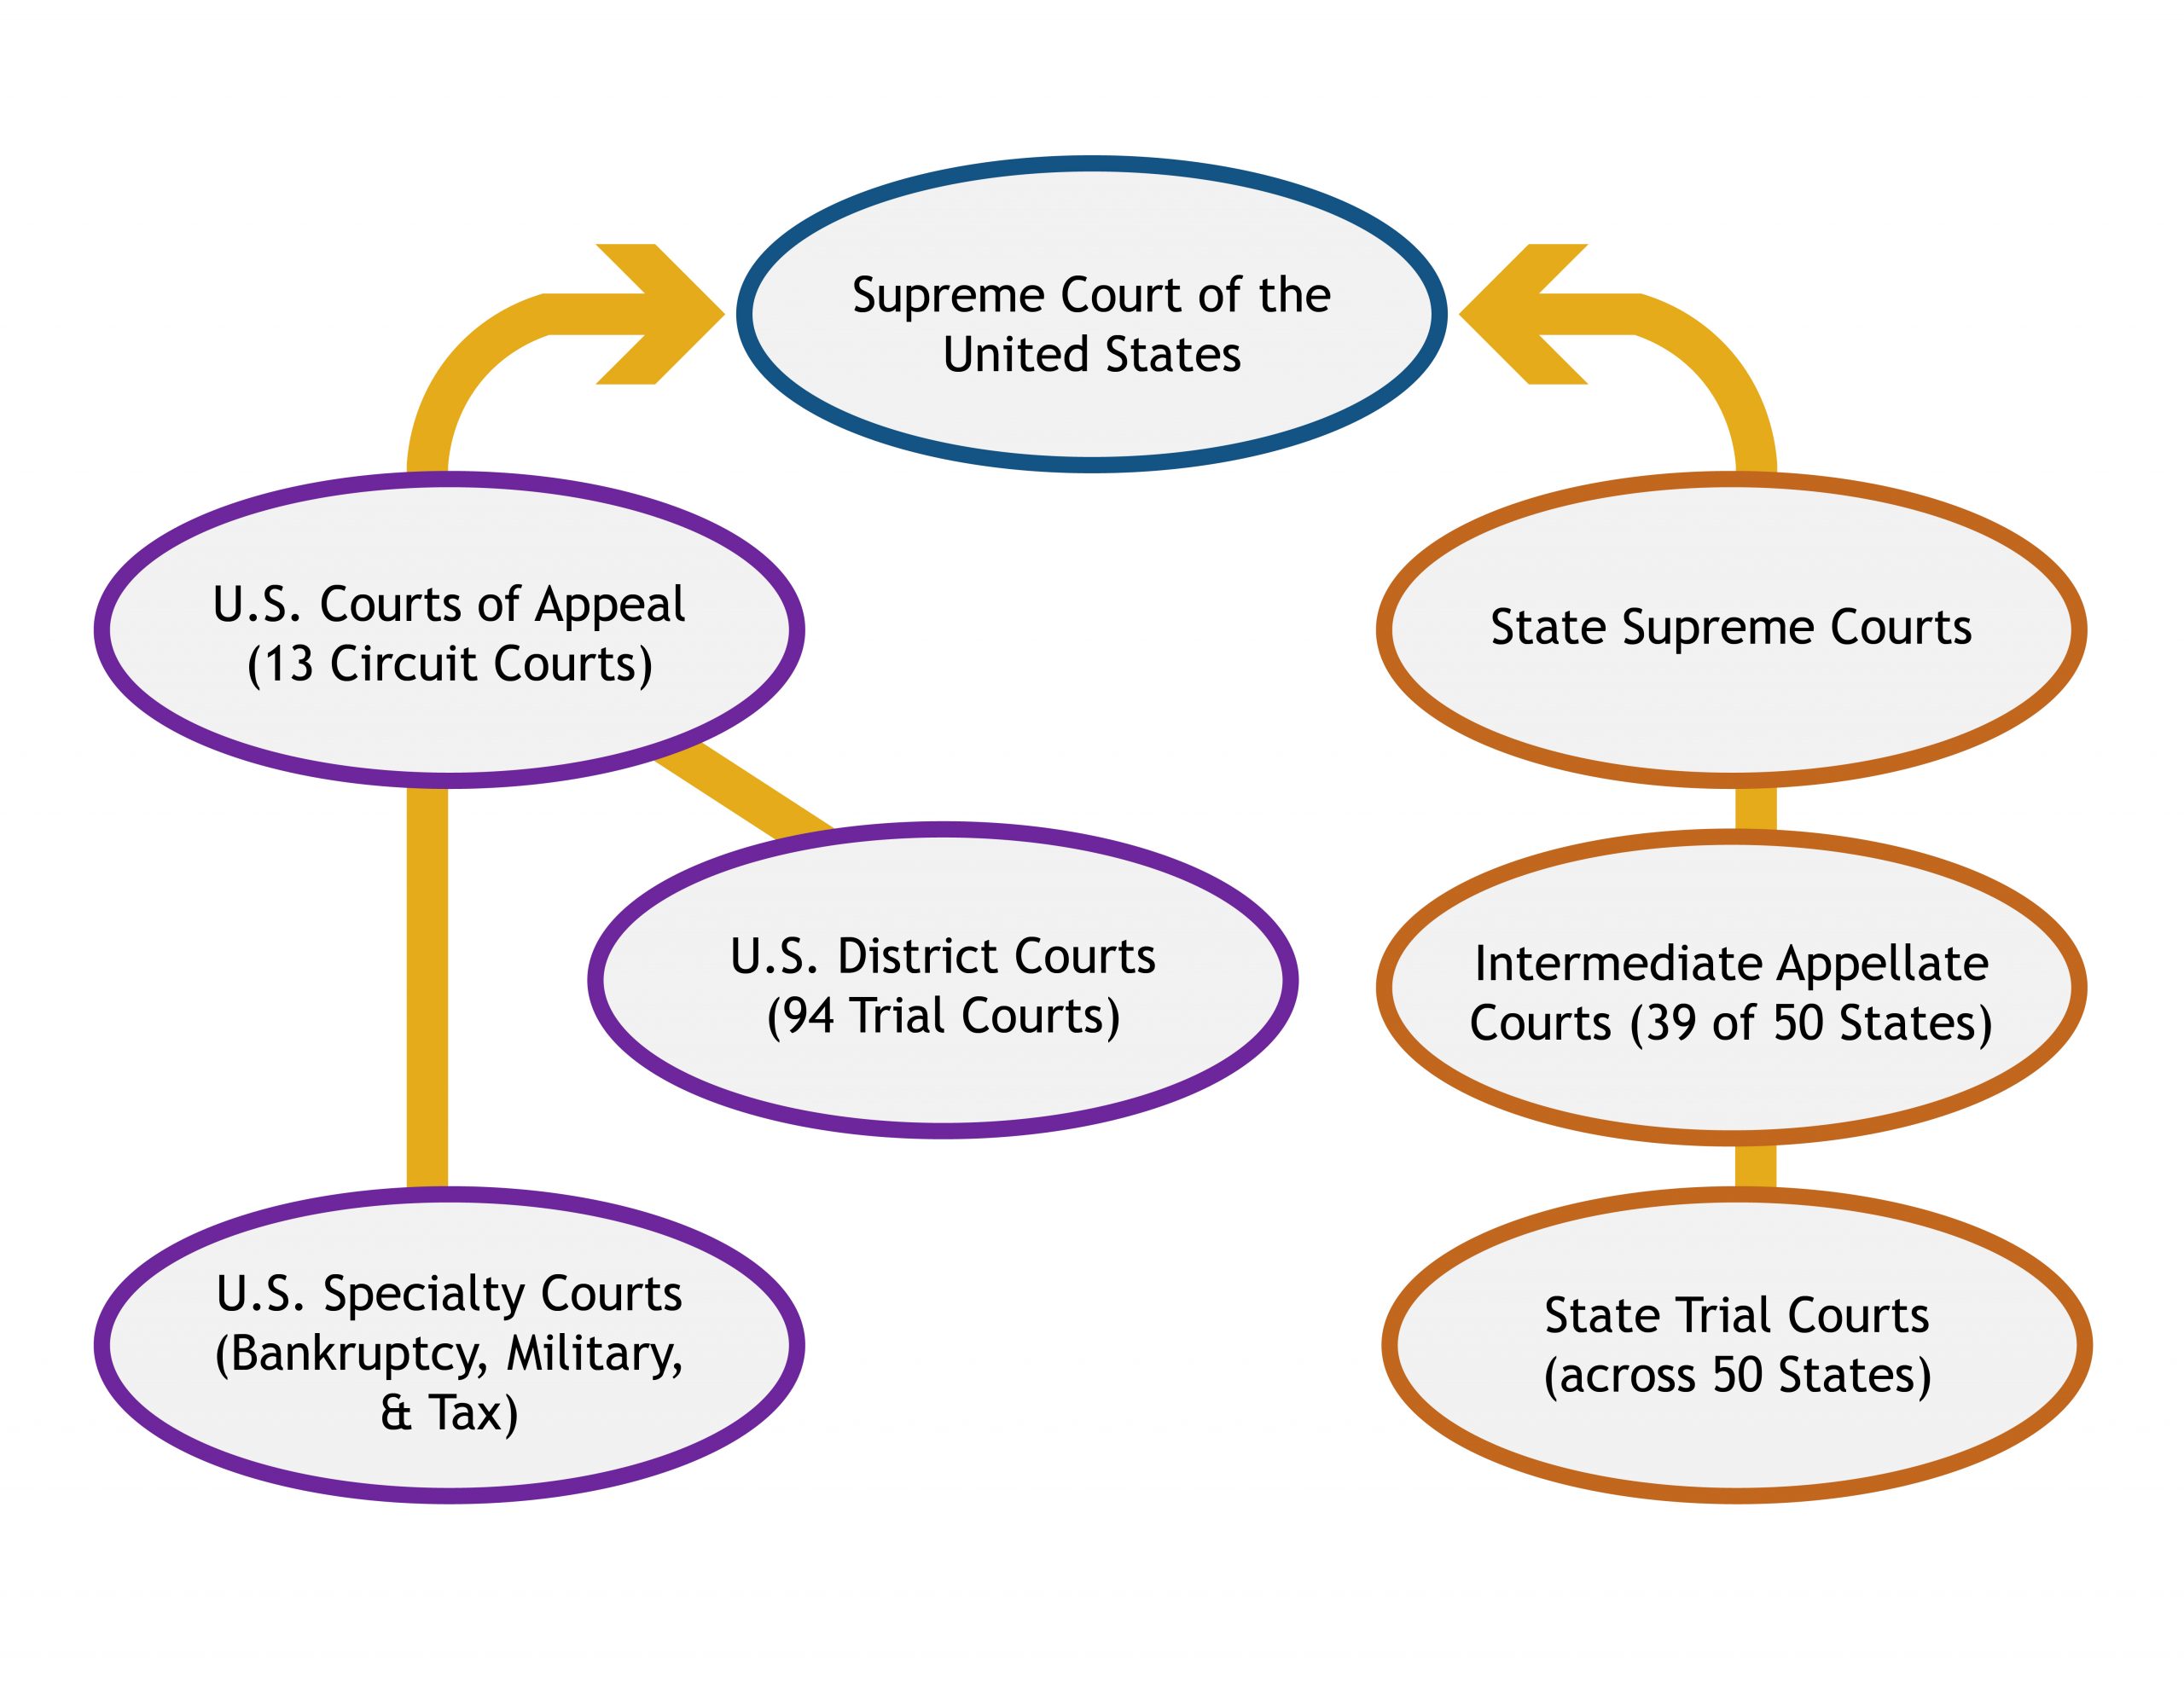 Flow chart showing the structure of trial and appellate courts